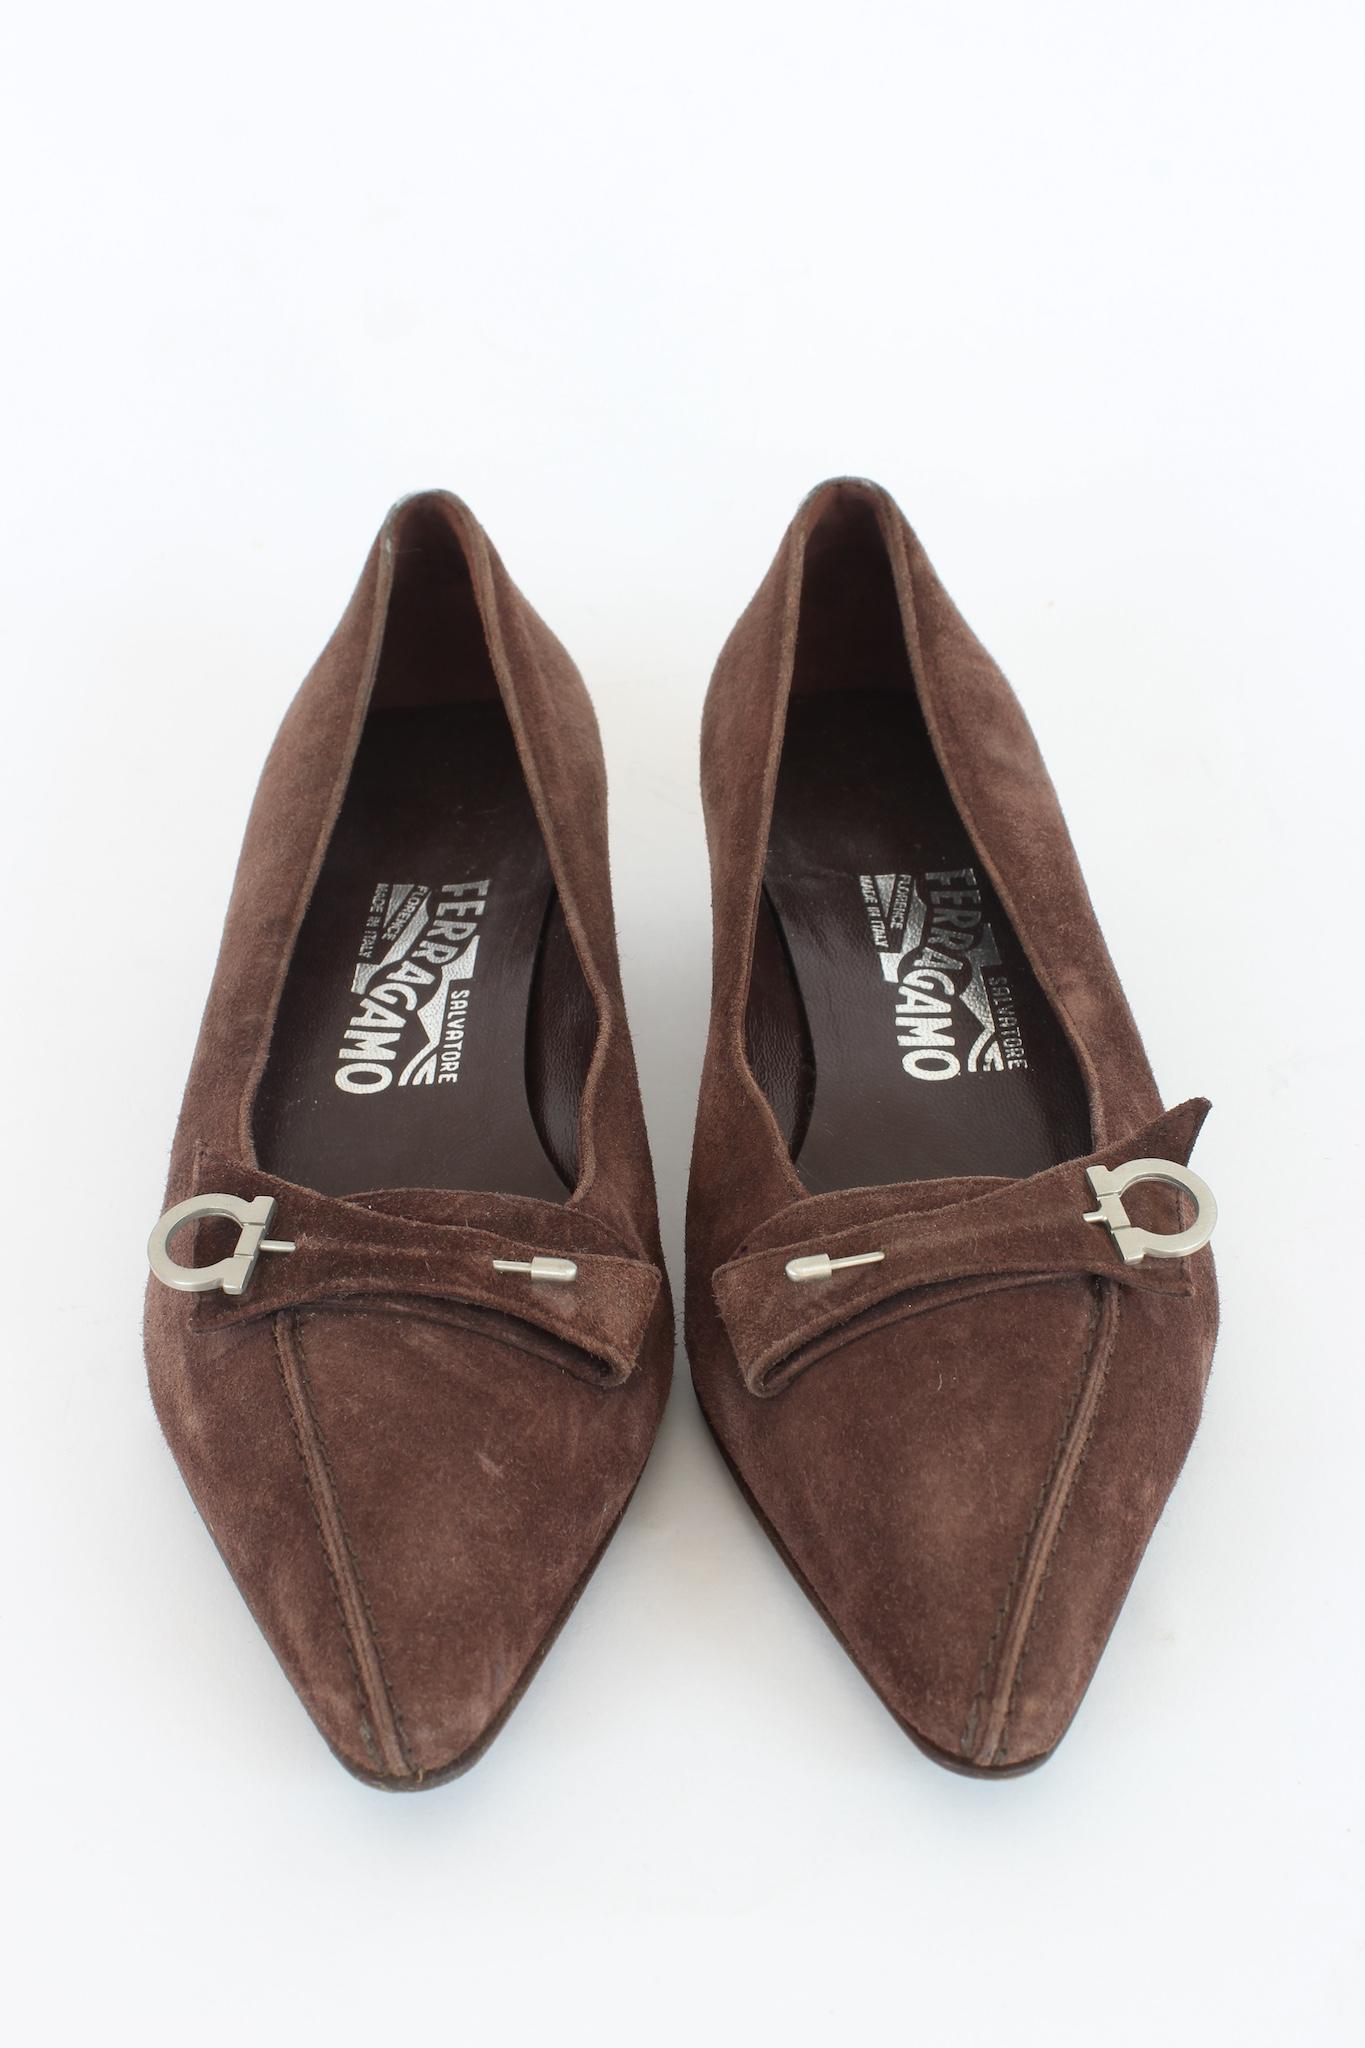 Salvatore Ferragamo shoes vintage 2000s. Ballerina model, brown color, 100% suede. Silver colored clasp. Made in italy.

Code: 0004304E21

Size: 6 C / 37 It

Sole length: 25 cm
Heel height: 3 cm